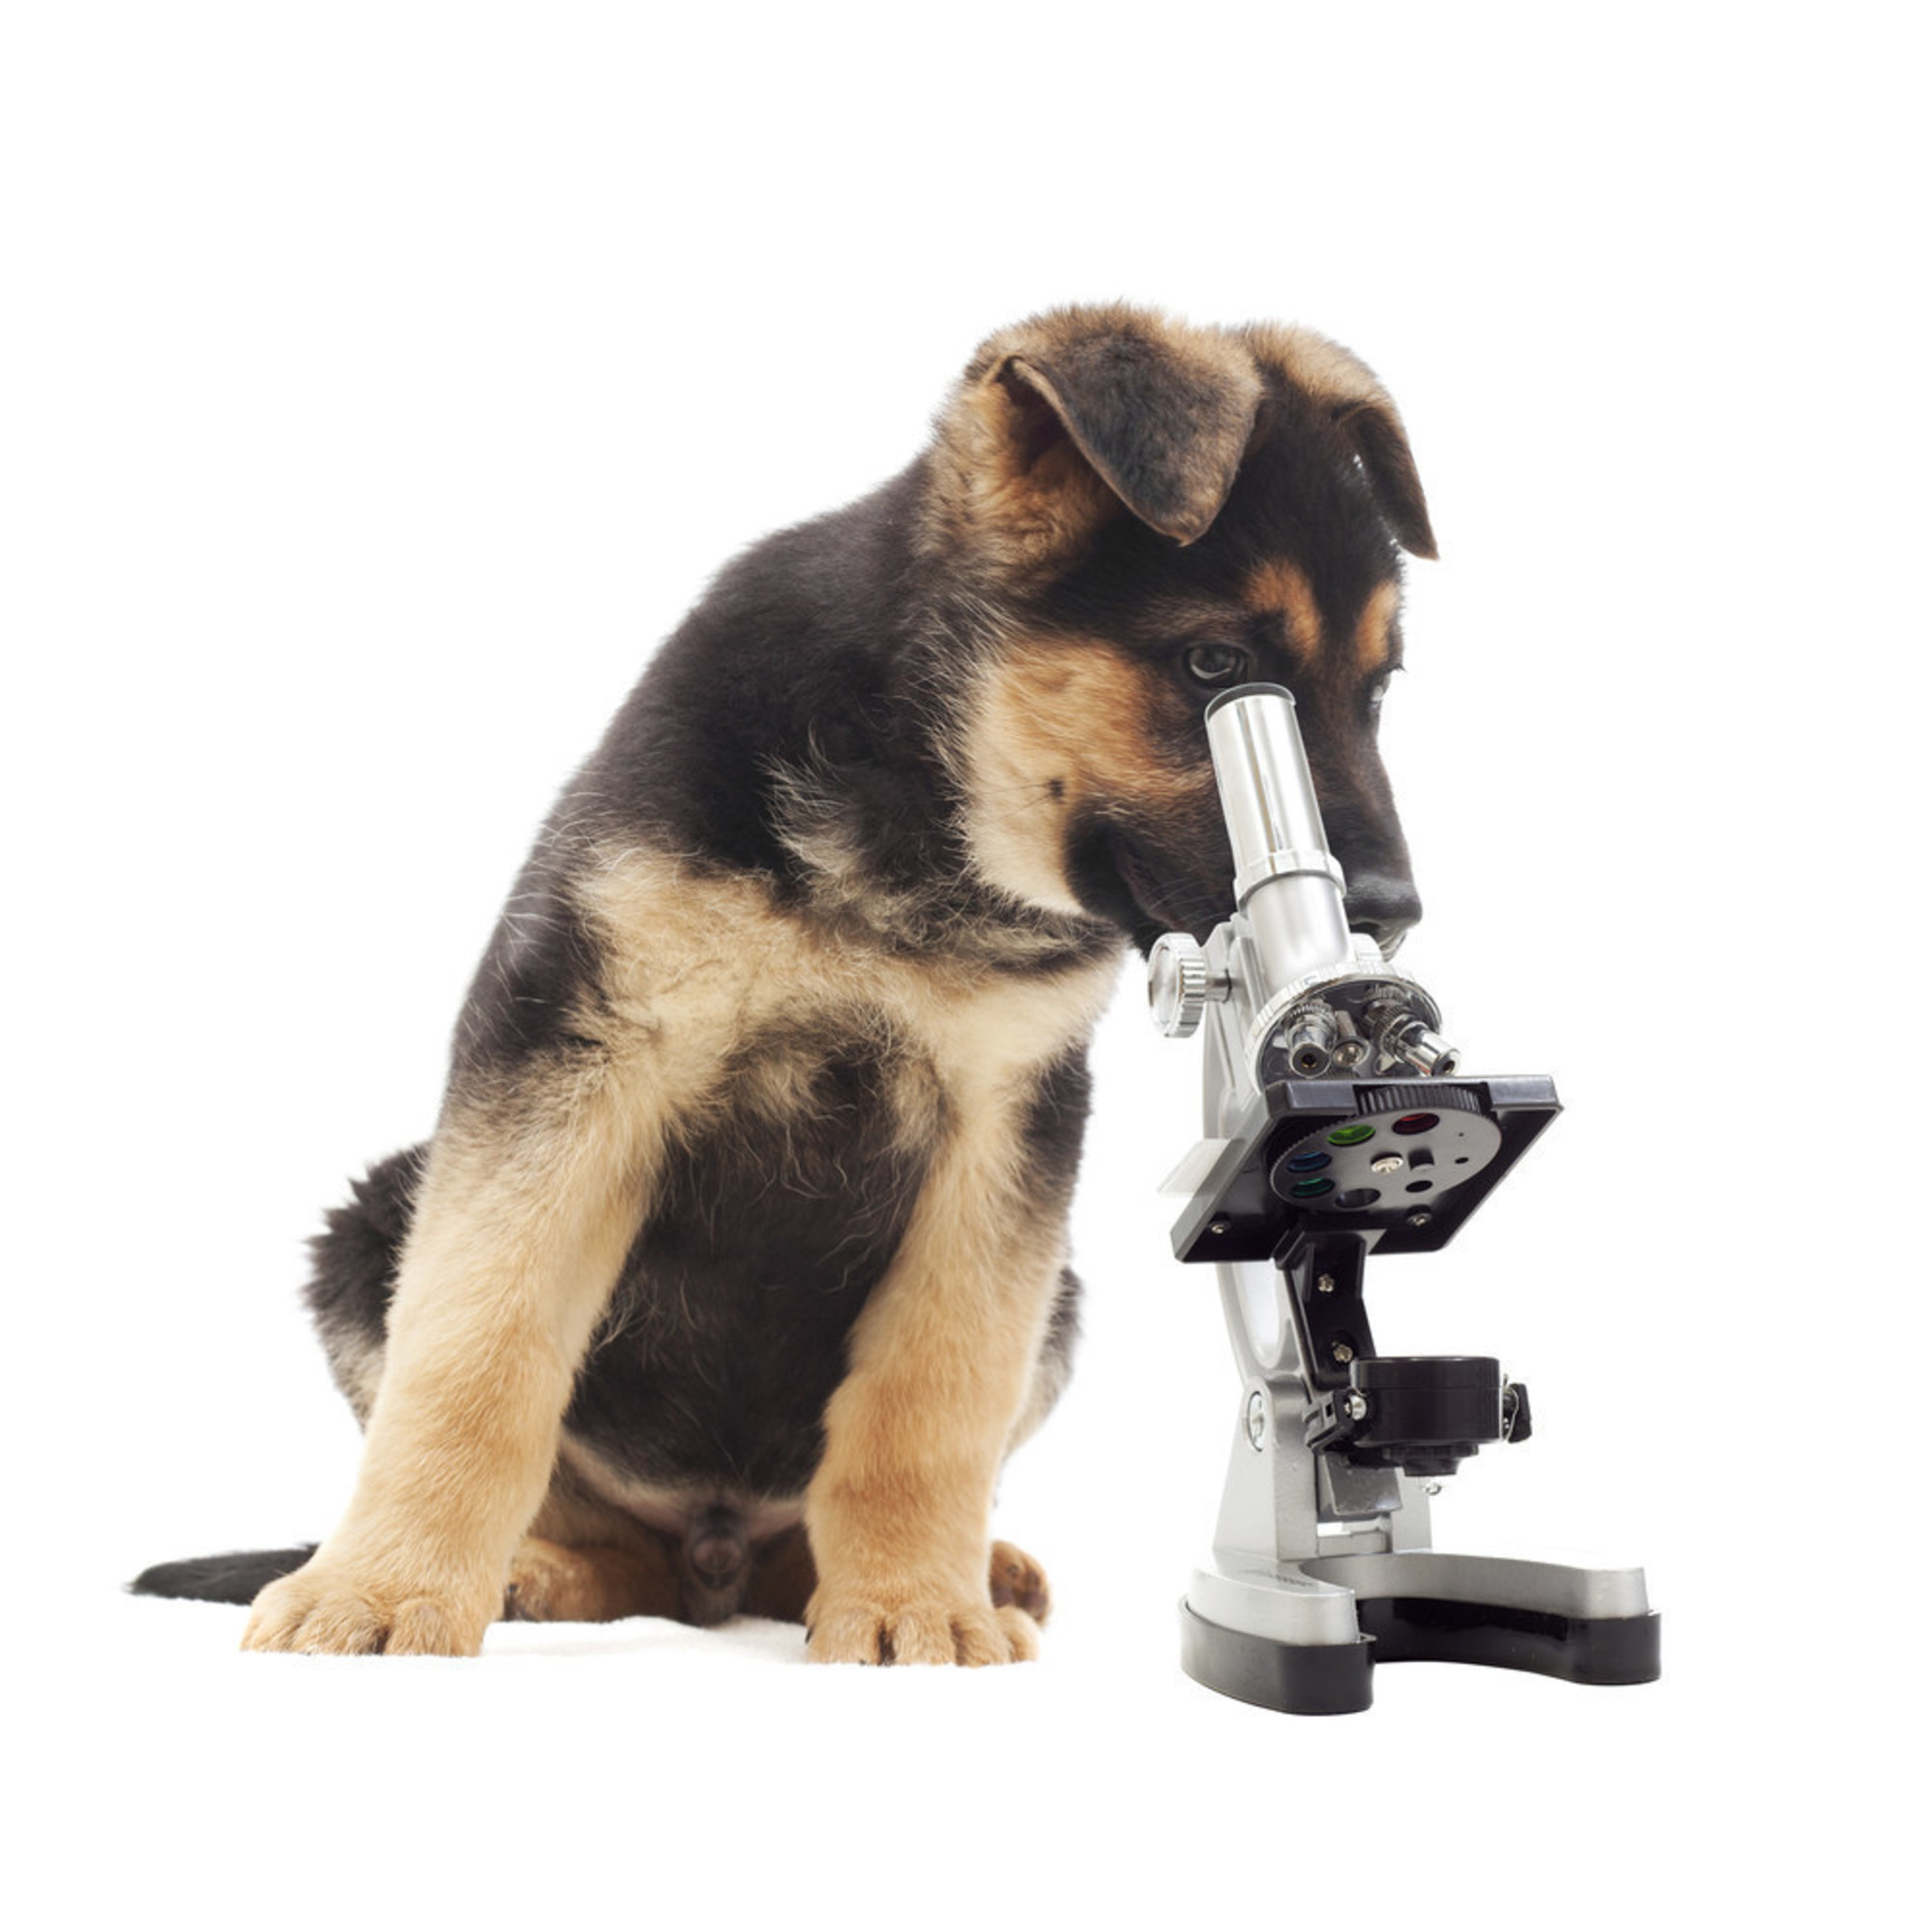 Genetic testing for pets is quickly catching up to its human counterpart.